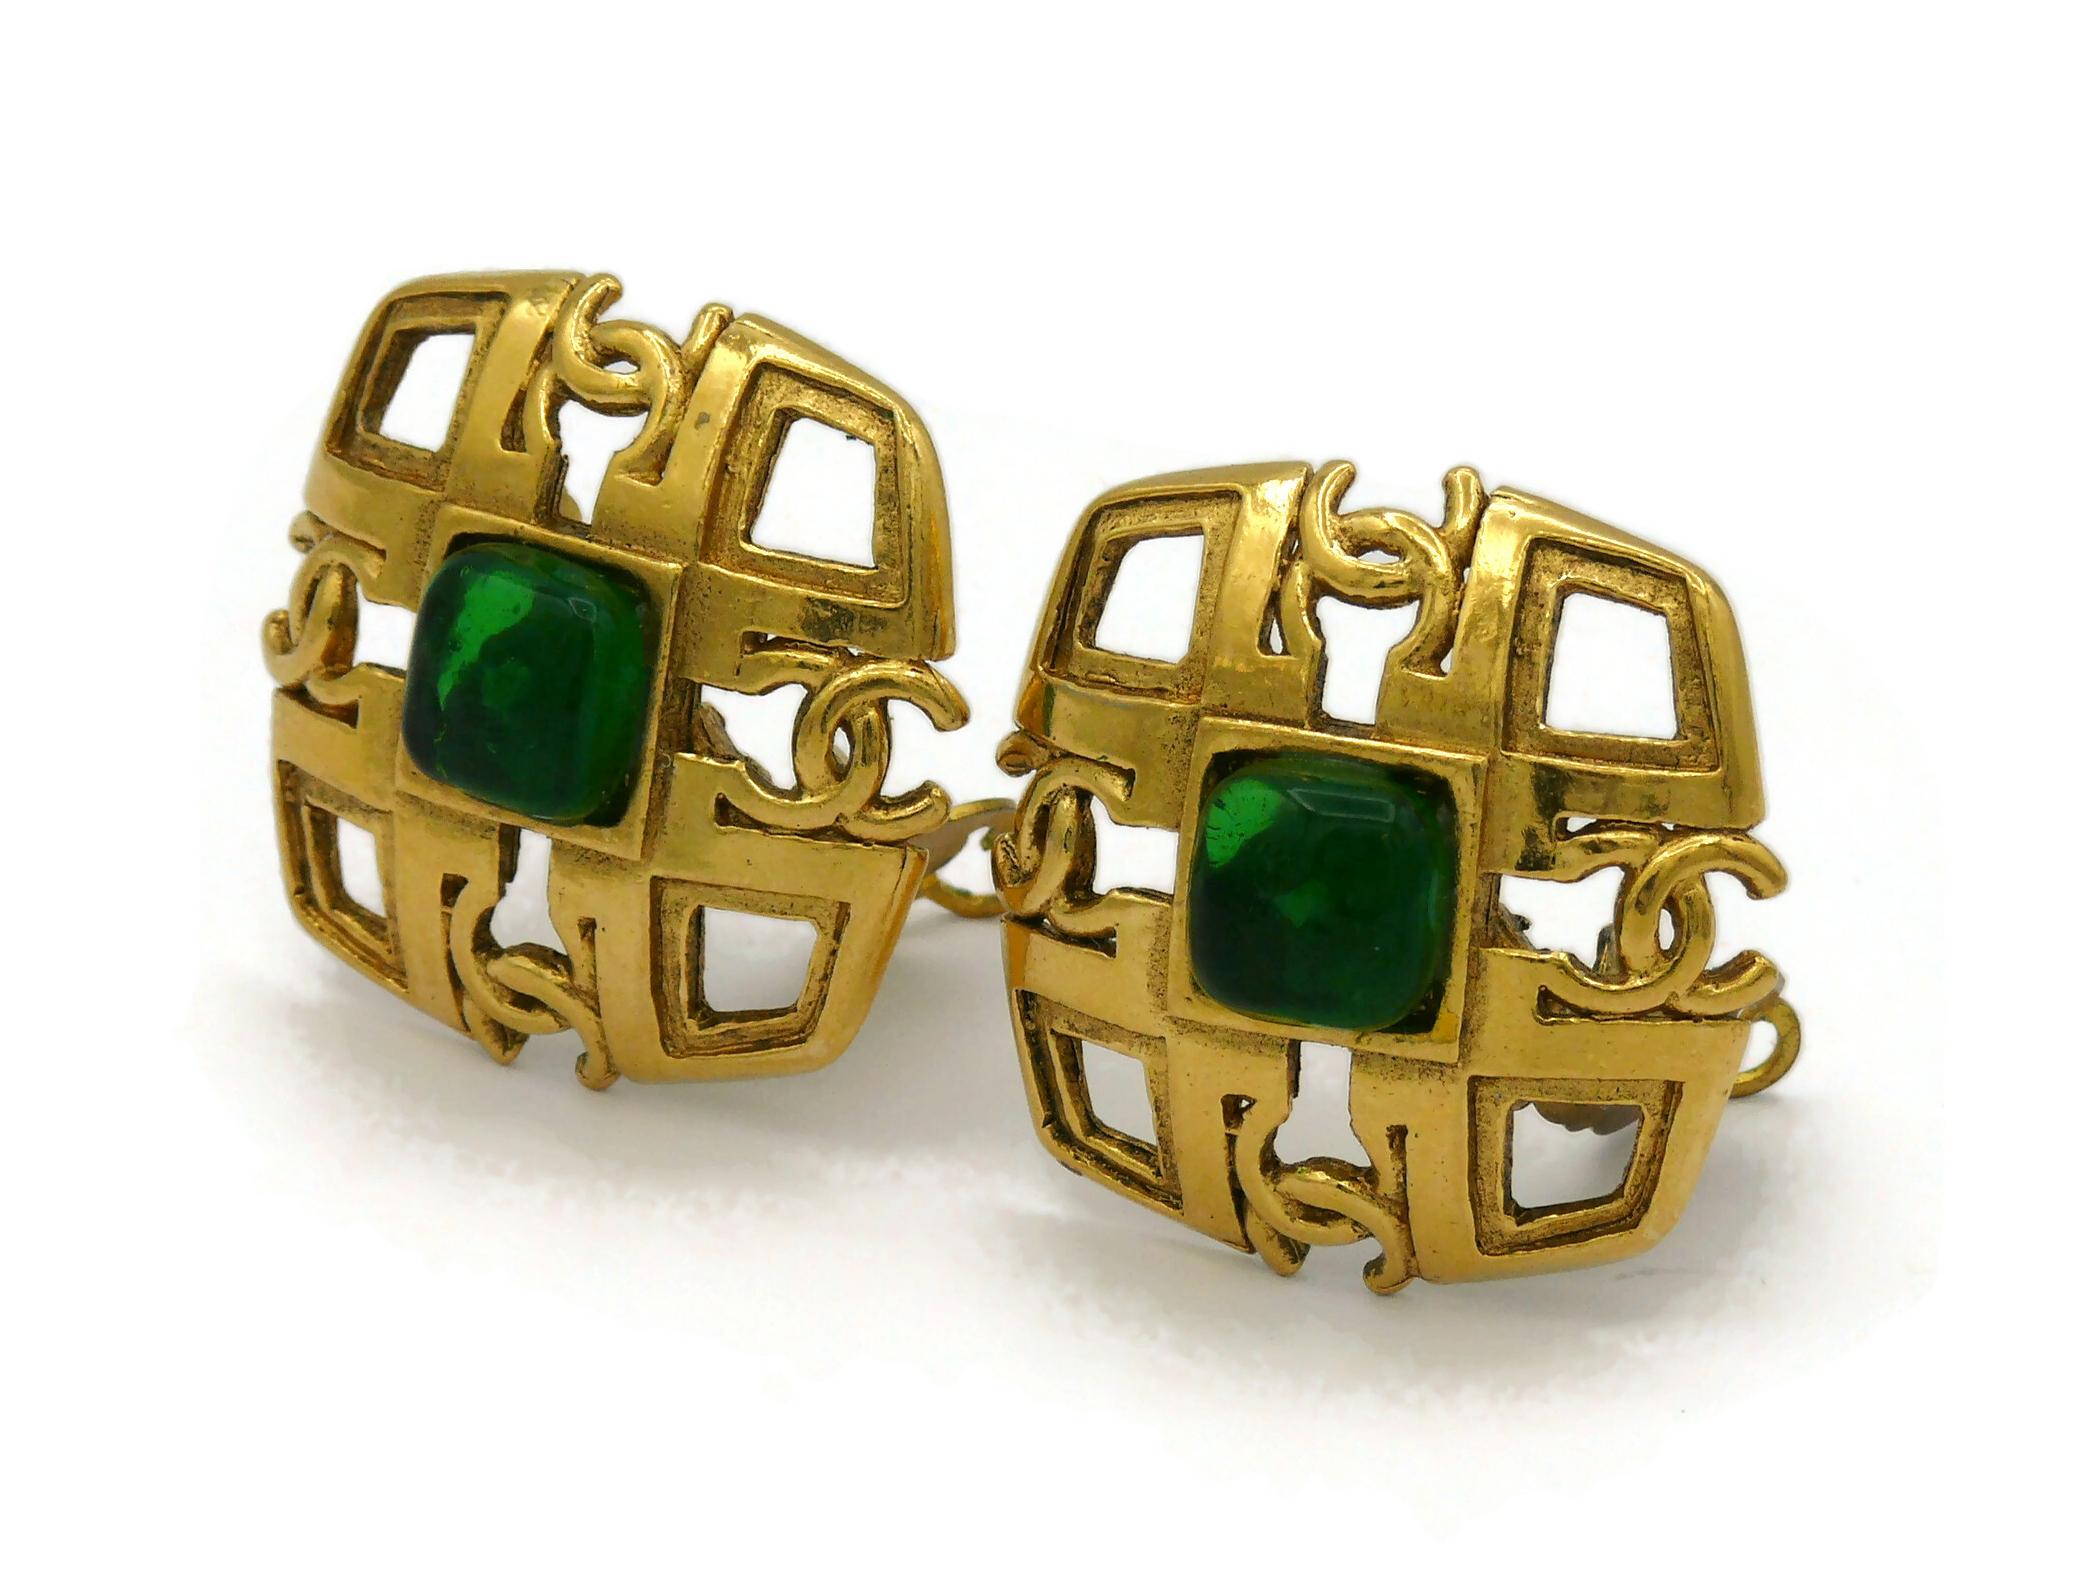 CHANEL by KARL LAGERFELD Vintage Gripoix CC Clip-On Earrings, 1988 For Sale 1